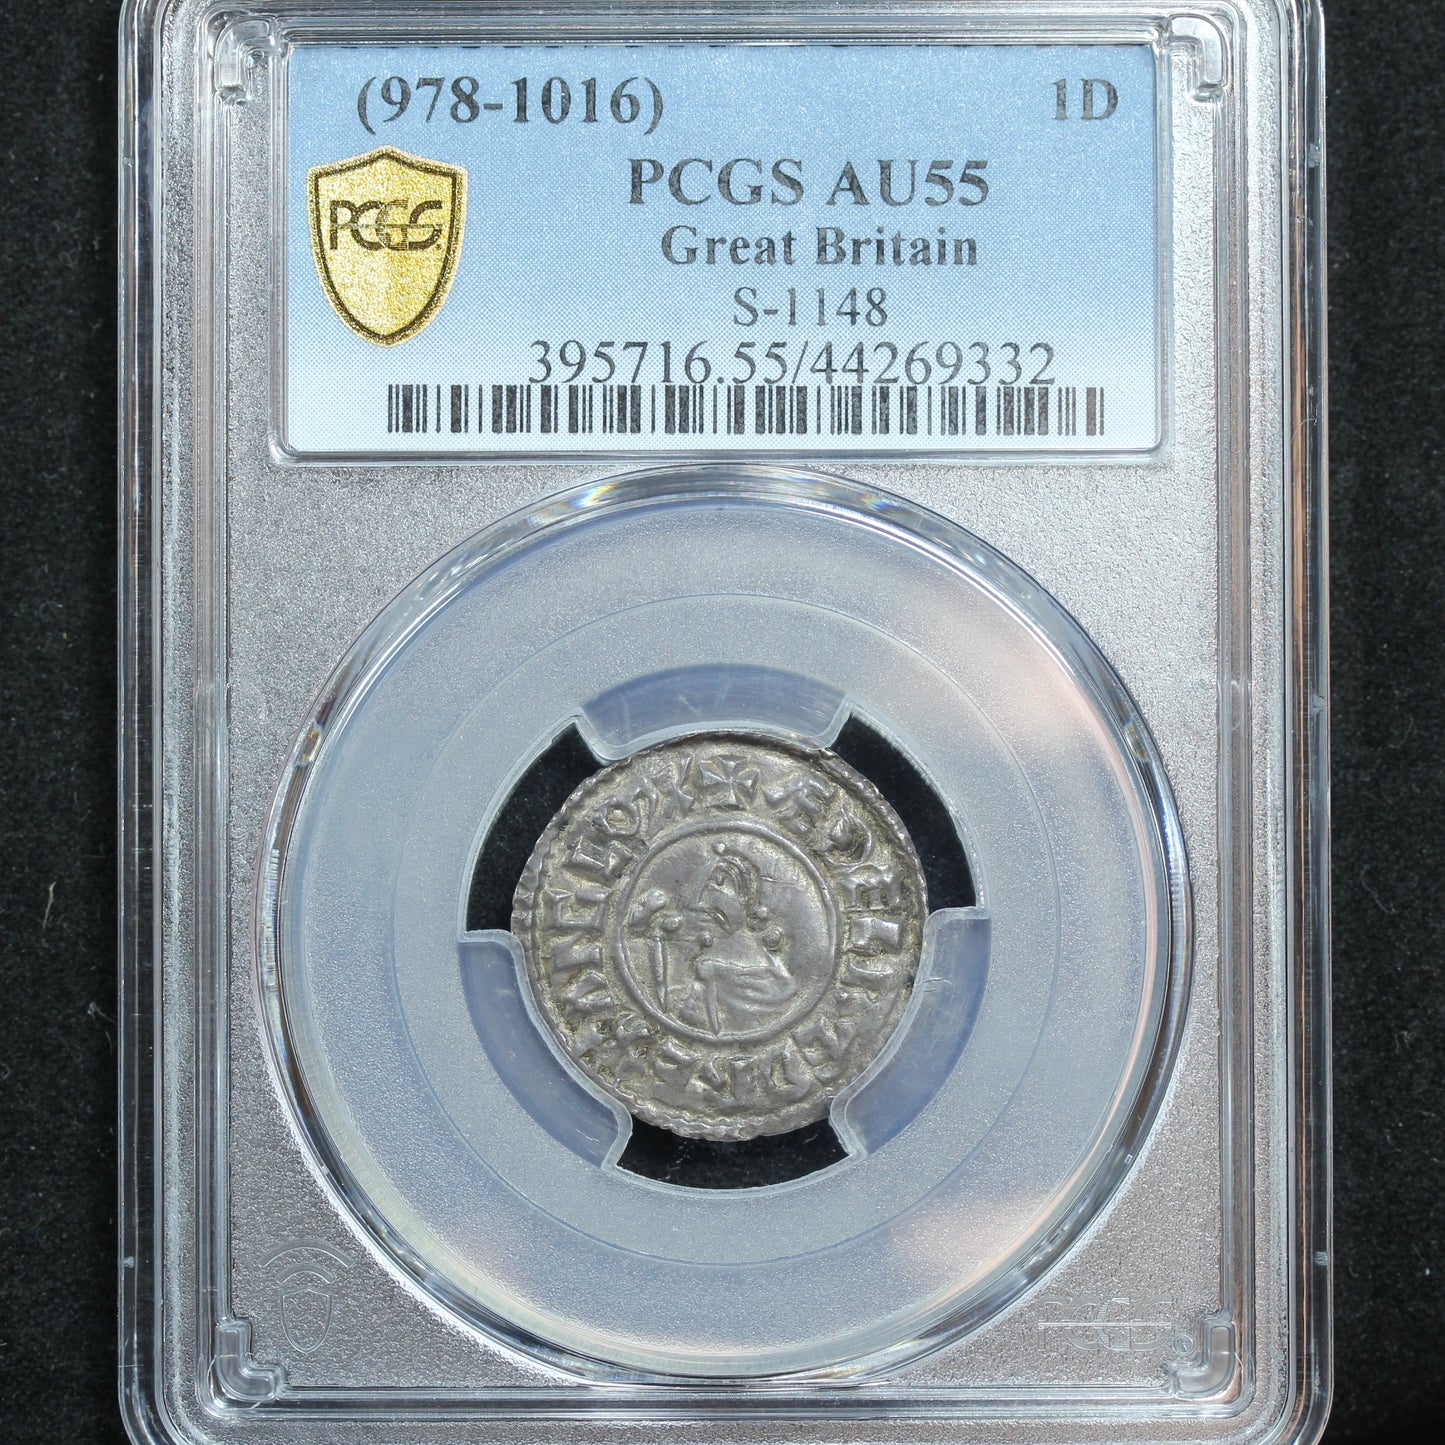 978-1016 Great Britain One Penny Silver Coin S-1148 Aethelred II - PCGS AU 55